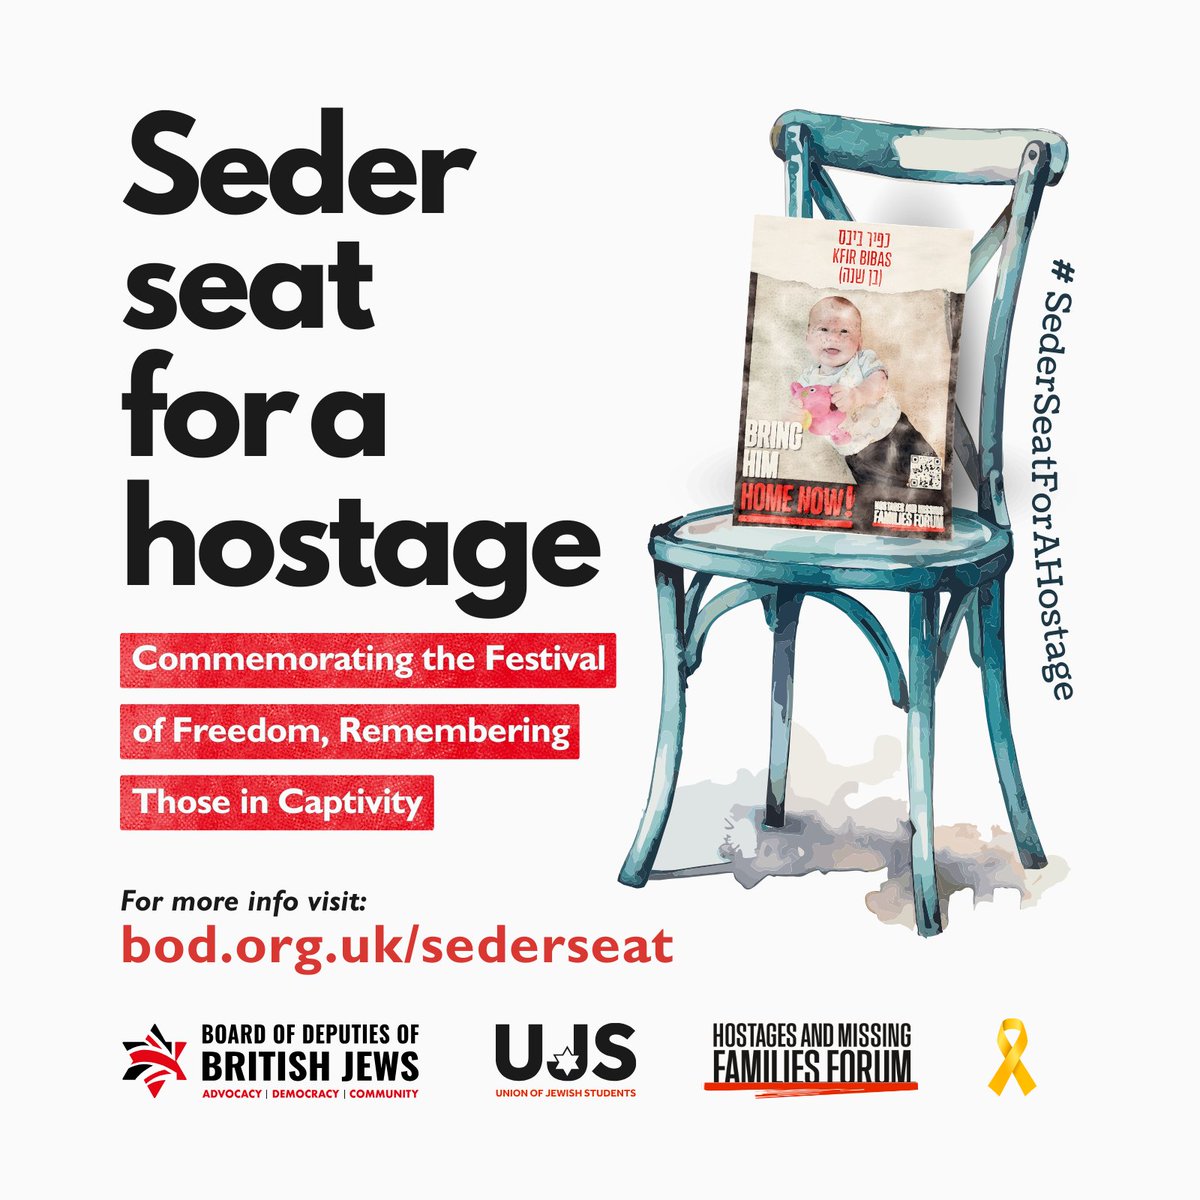 This Pesach, we are urging individuals and families to set an extra place at their Seder table for one of the more than 100 men, women, and children still held hostage by Hamas. #SederSeatForAHostage For more information, and posters visit: bod.org.uk/sederseat